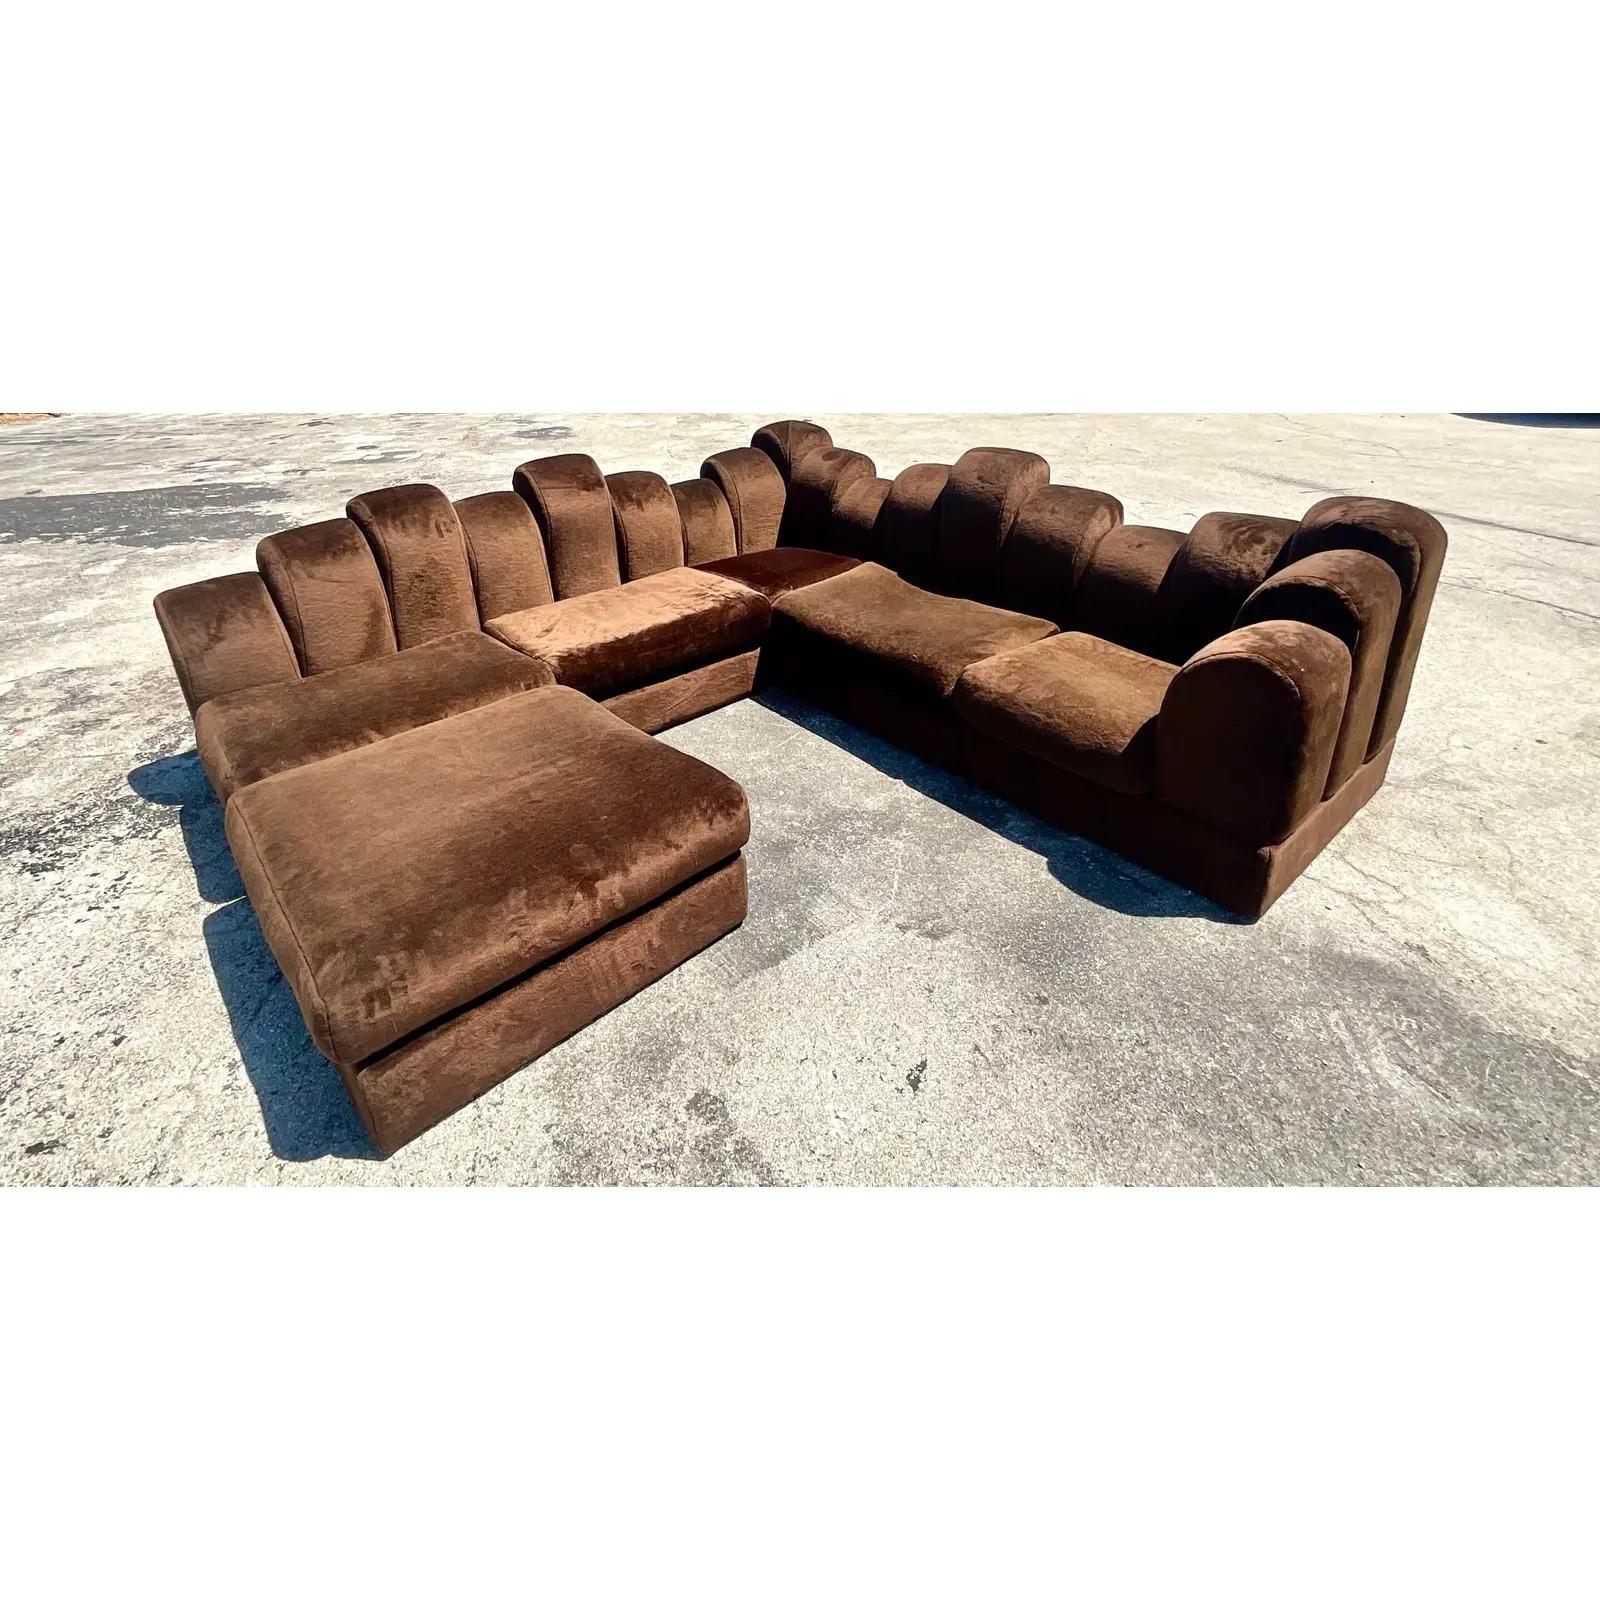 70s couch